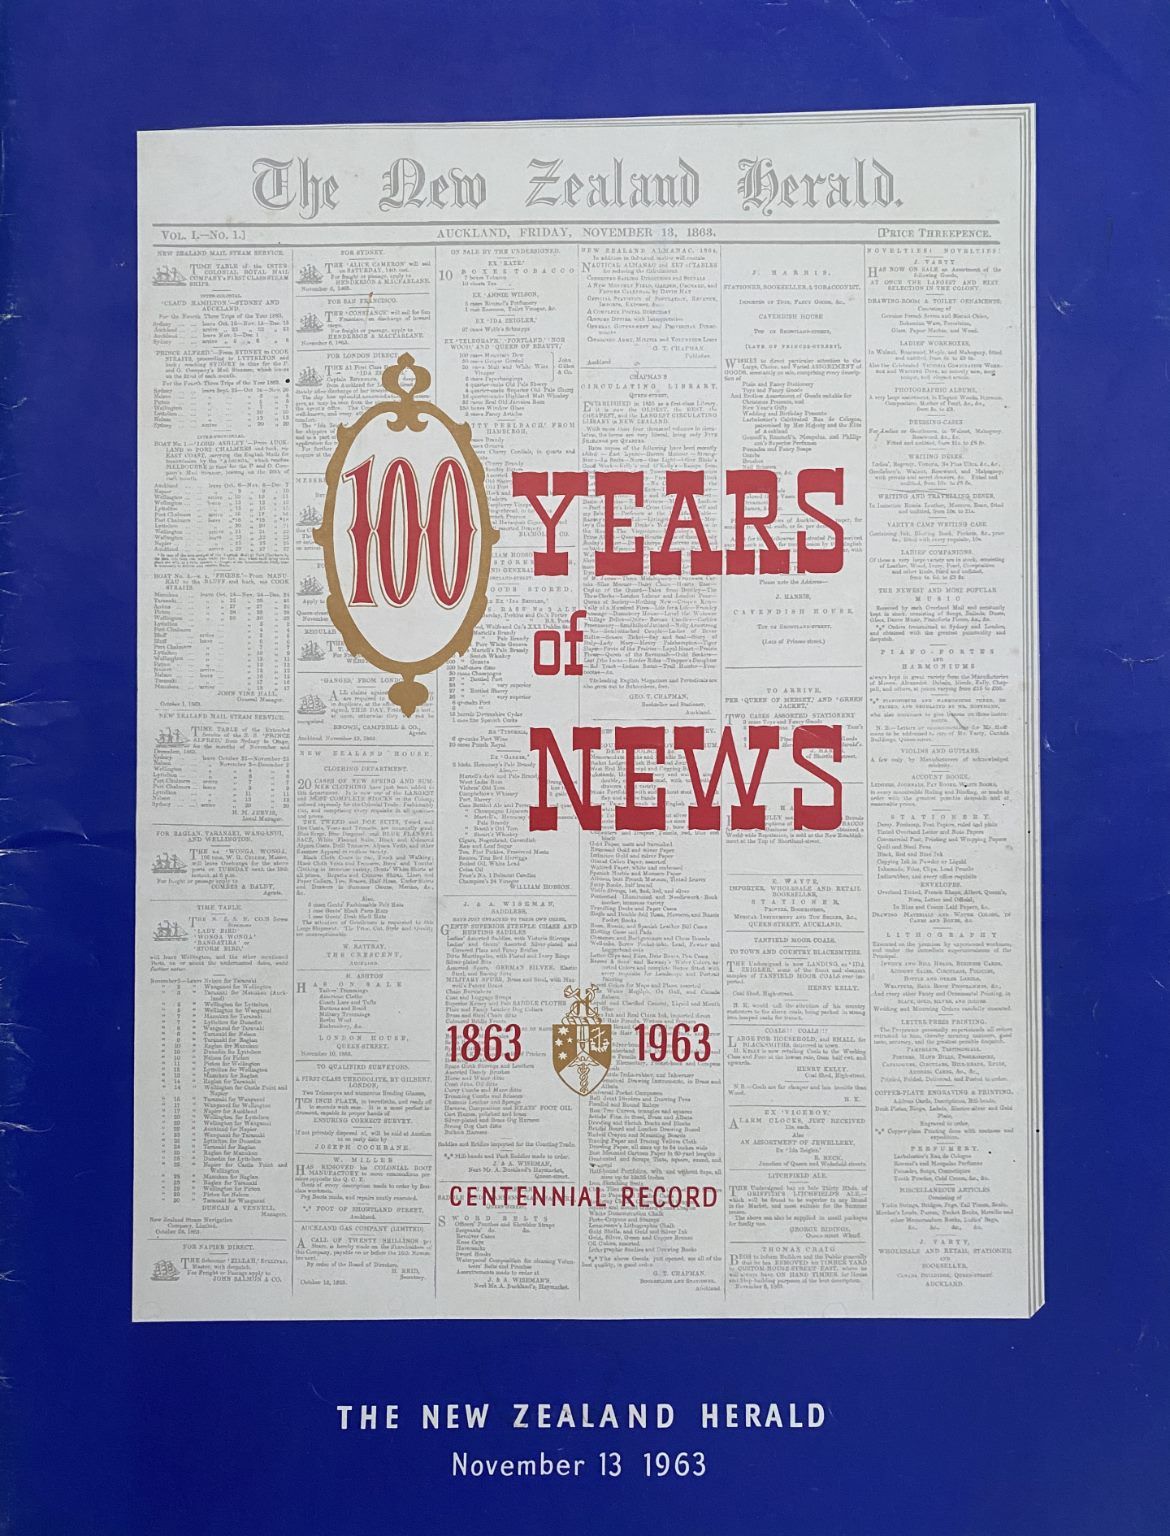 OLD NEWSPAPER: New Zealand Herald 100 Years of News 1863-1963, Centennial Record